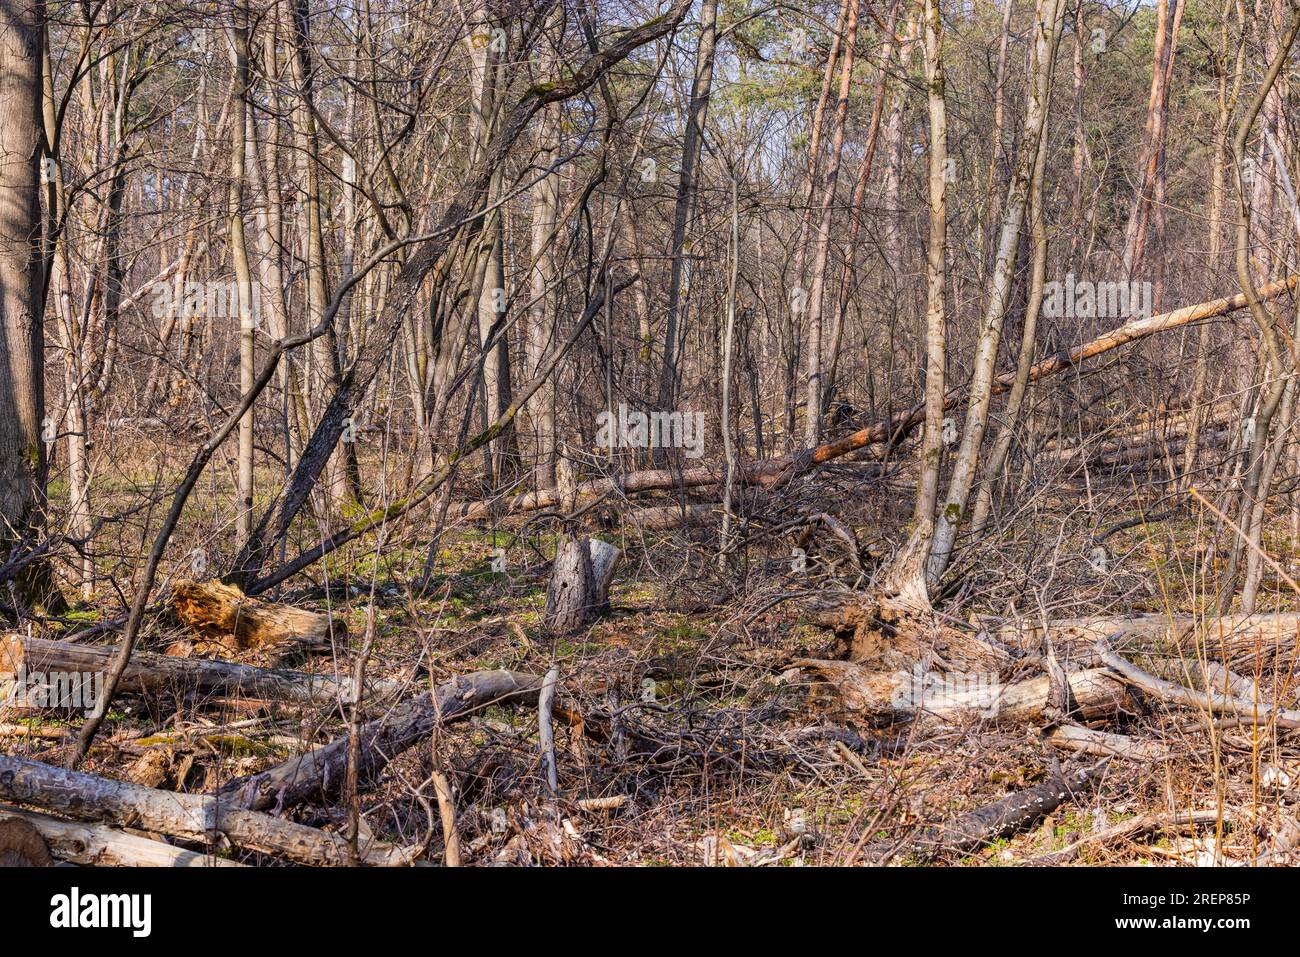 Many fallen trees in a weakened forest damaged by drought and insect infestation Stock Photo